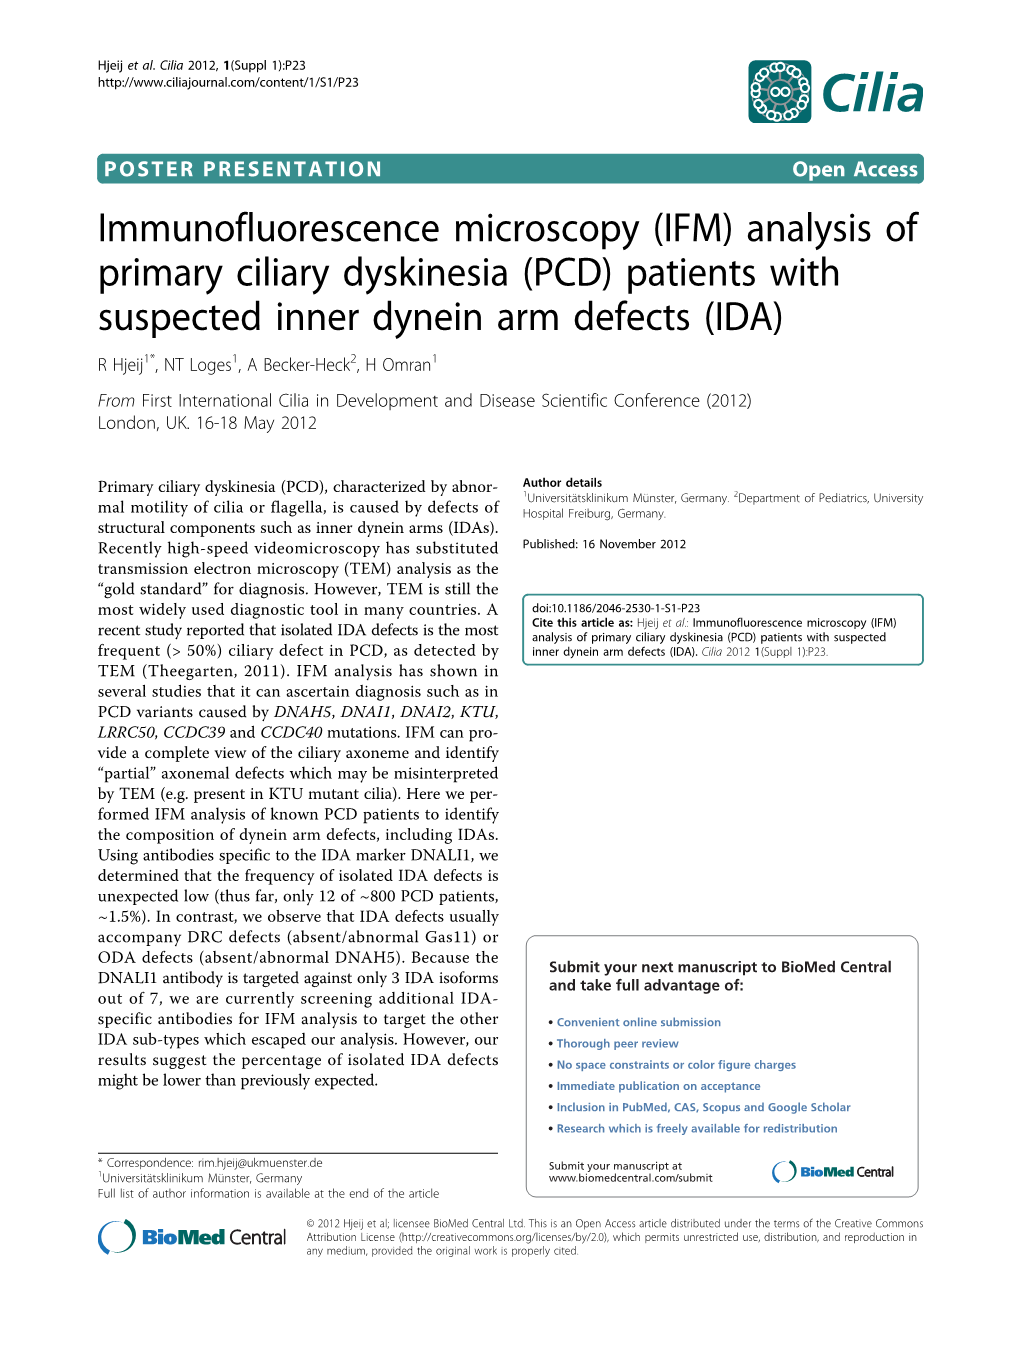 IFM) Analysis of Primary Ciliary Dyskinesia (PCD) Patients with Suspected Inner Dynein Arm Defects (IDA